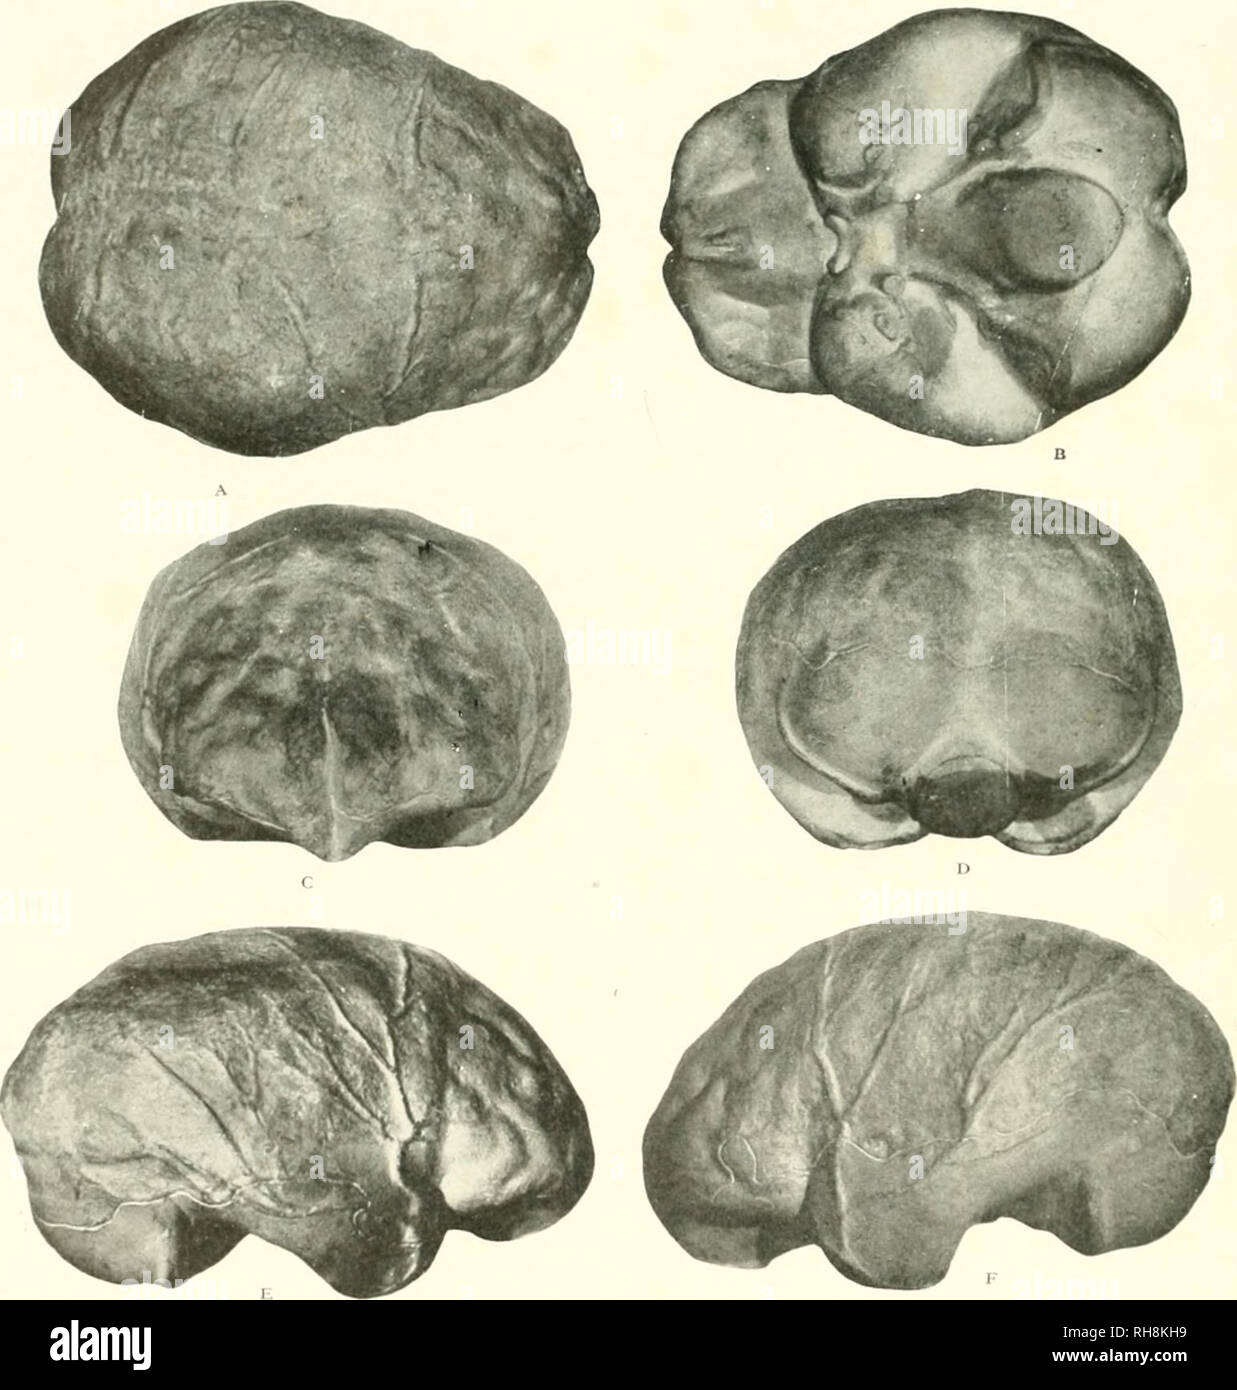 . The brain from ape to man; a contribution to the study of the evolution and development of the human brain. Brain; Evolution; Pongidae. FIGS. 366 TO 371. SIX MEWS OI- THE ENDOCRAMAL CAST OF PITHECAN- THROPUS ERECTUS (JAVAN APE-.MAN) THE MOST PRIMIIIXF KNOWN REPRE- SENTATIVE OF THE HUMAN FAMILY. ESTIMATED ANIiyLII'i OF FOSSIL 500,000 YEARS. RESTOKA 1 lONK B'l PROF. J. H. MCGREGOR. (a) Vertex, (d) Base Restored. ((;/ ItdiUmI Pole. M)) Oeei|)it.il Pole, (e) Riglu Lateral Surfaee. (1) Left Lateral surface. The frontal convolutions and br.inclies of the middle meningeal artery are especially well Stock Photo